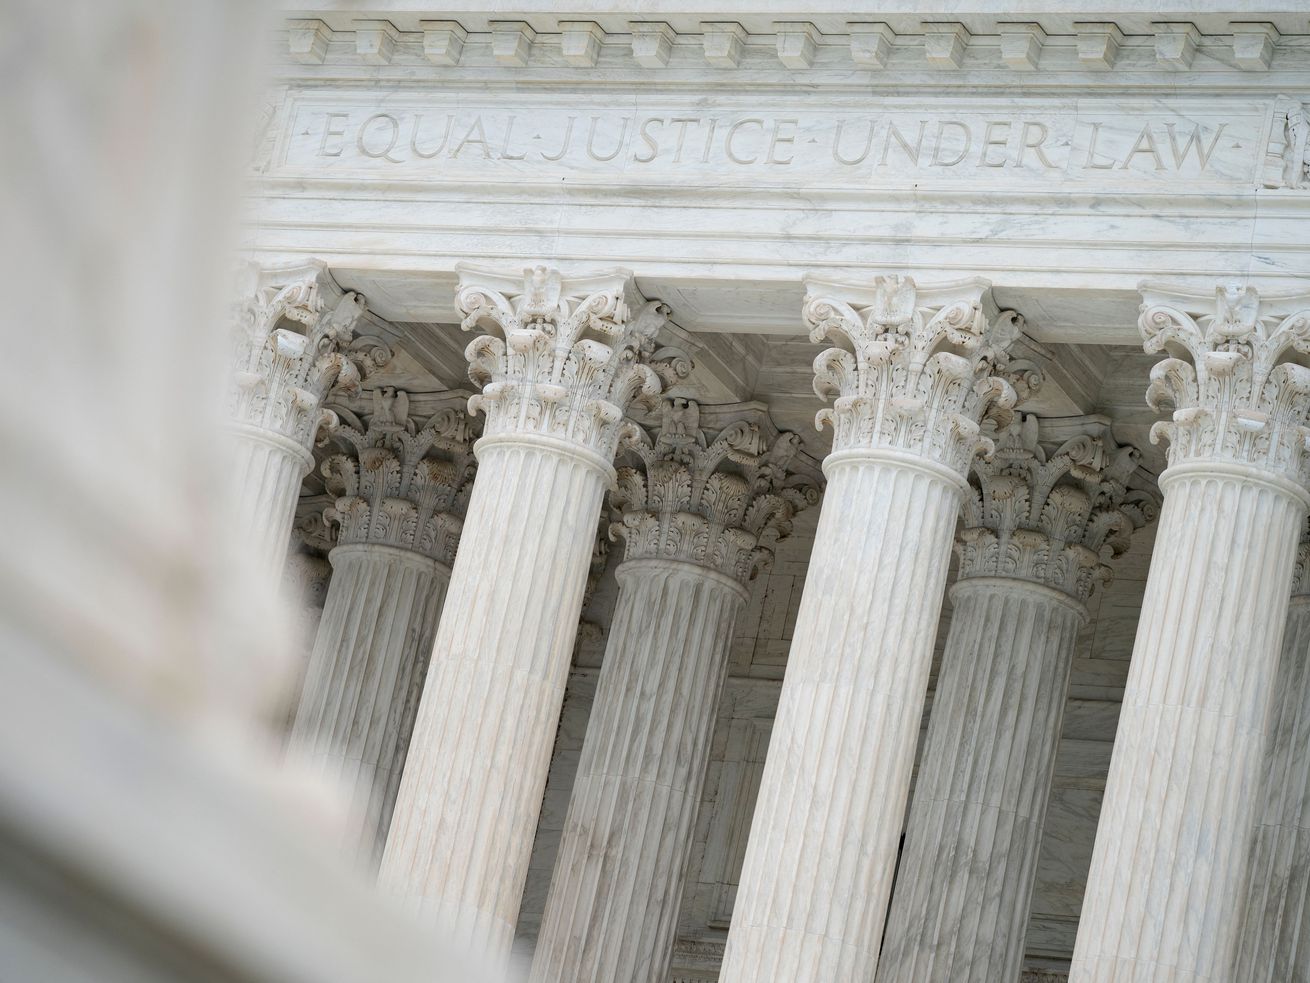 Leaked opinion suggests Supreme Court will overturn Roe v. Wade